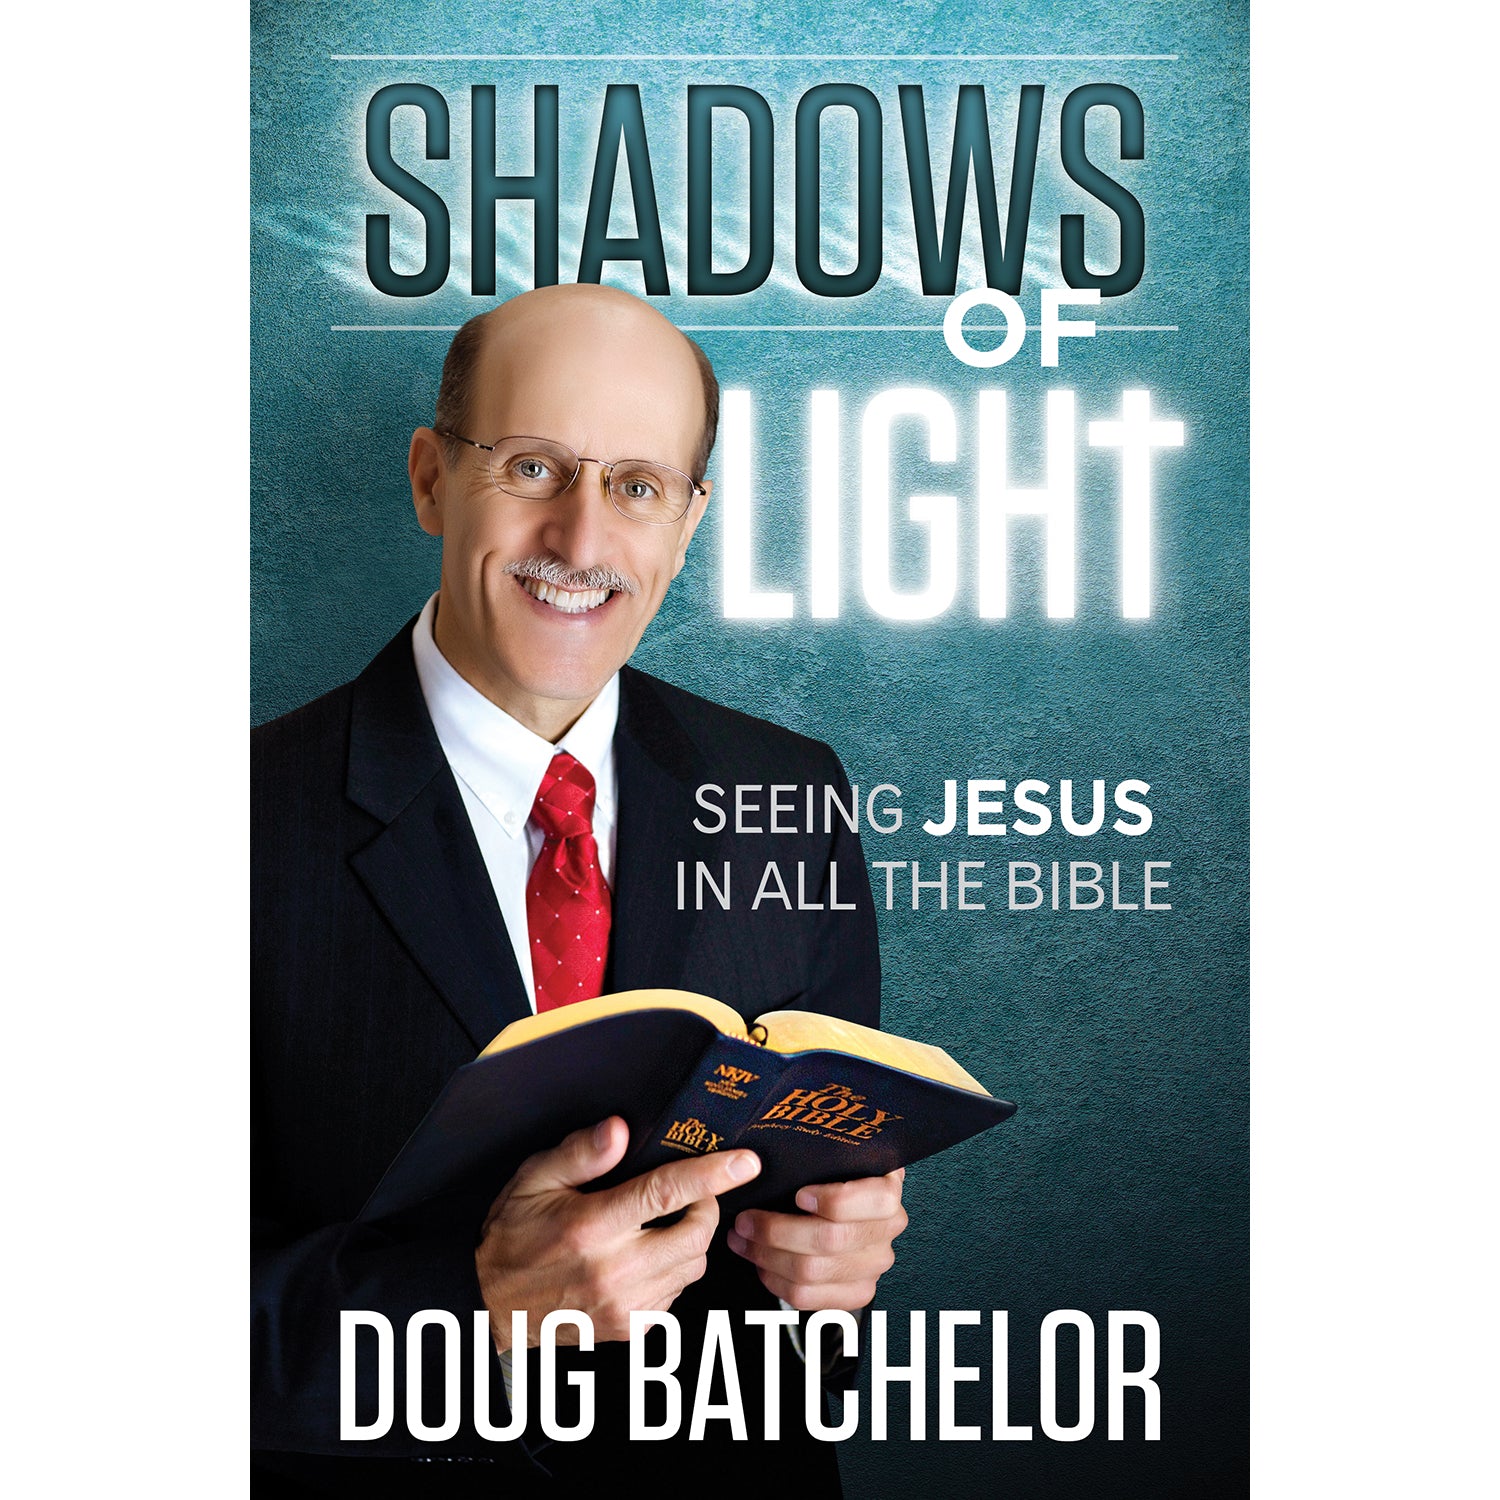 Shadows of Light: Seeing Jesus in All the Bible